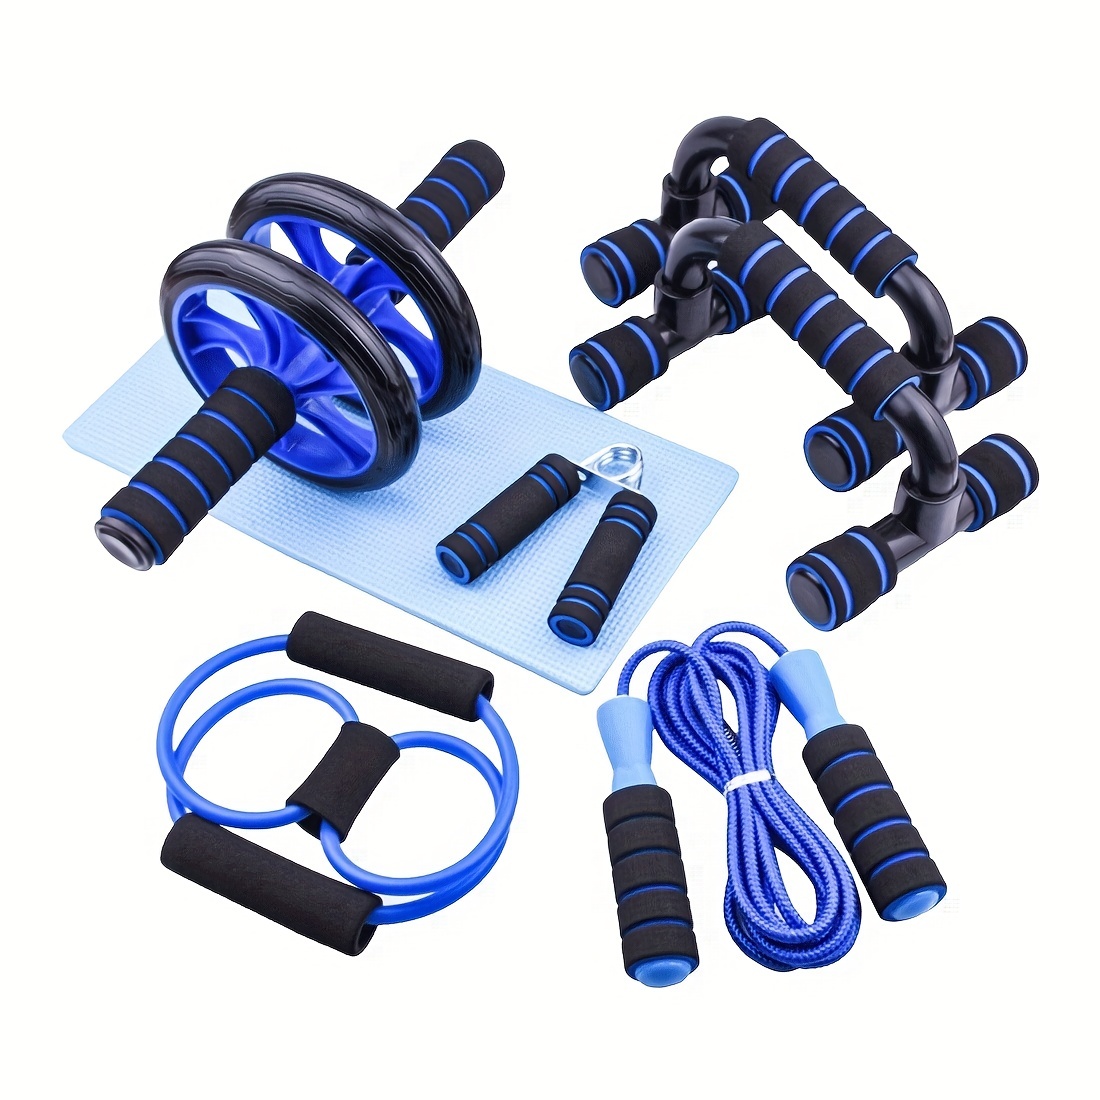 

1set, Ab Roller Wheel, Knee Pad, Push-up Stands, Jump Ropes, Tension Bands, Grip Stretchers, Home & Gym Fitness Training Equipment Set